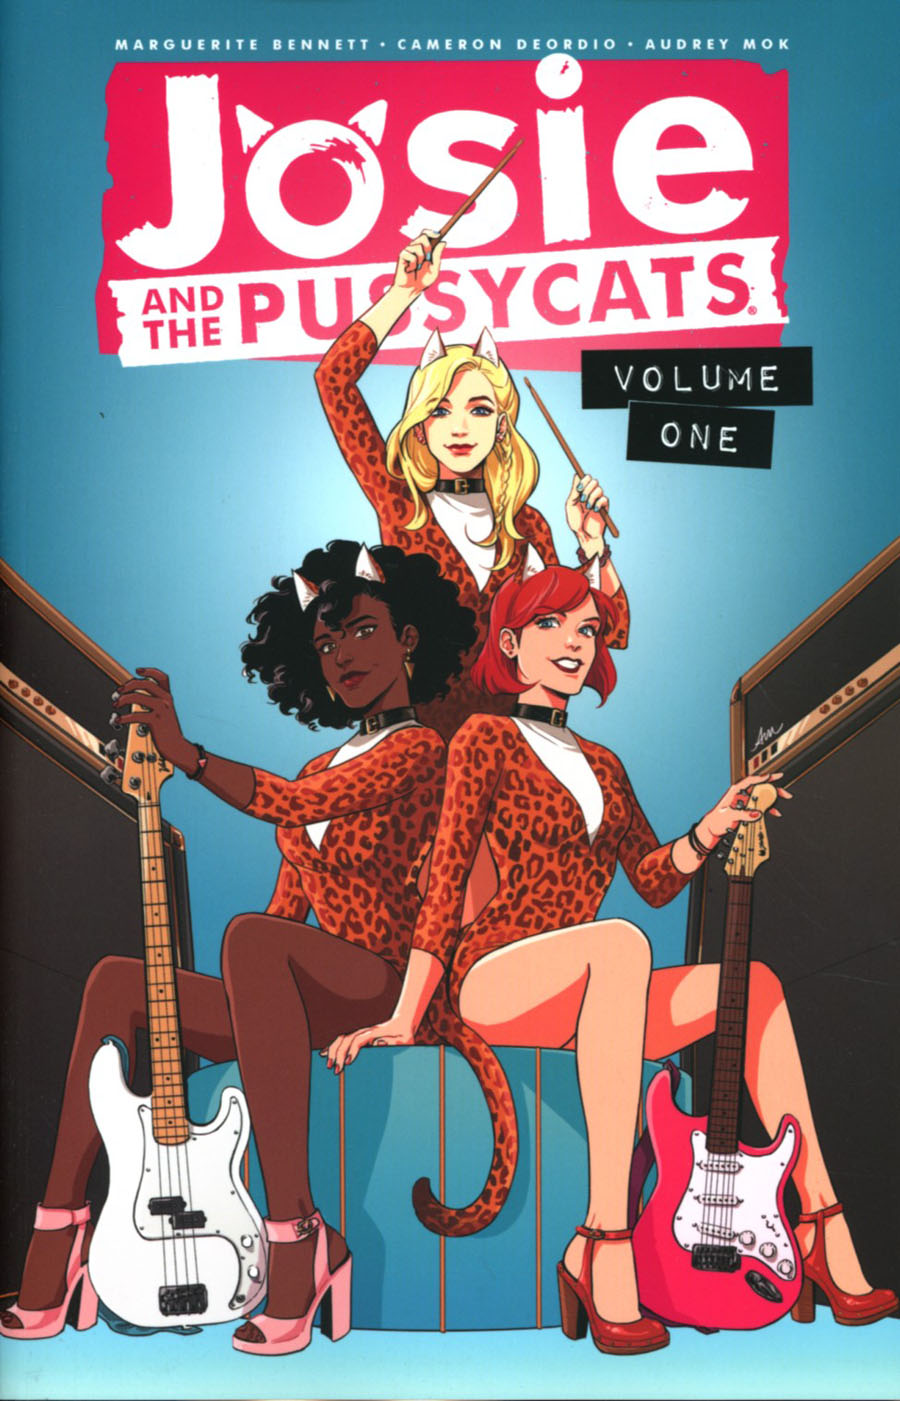 Josie And The Pussycats Vol 1 TP